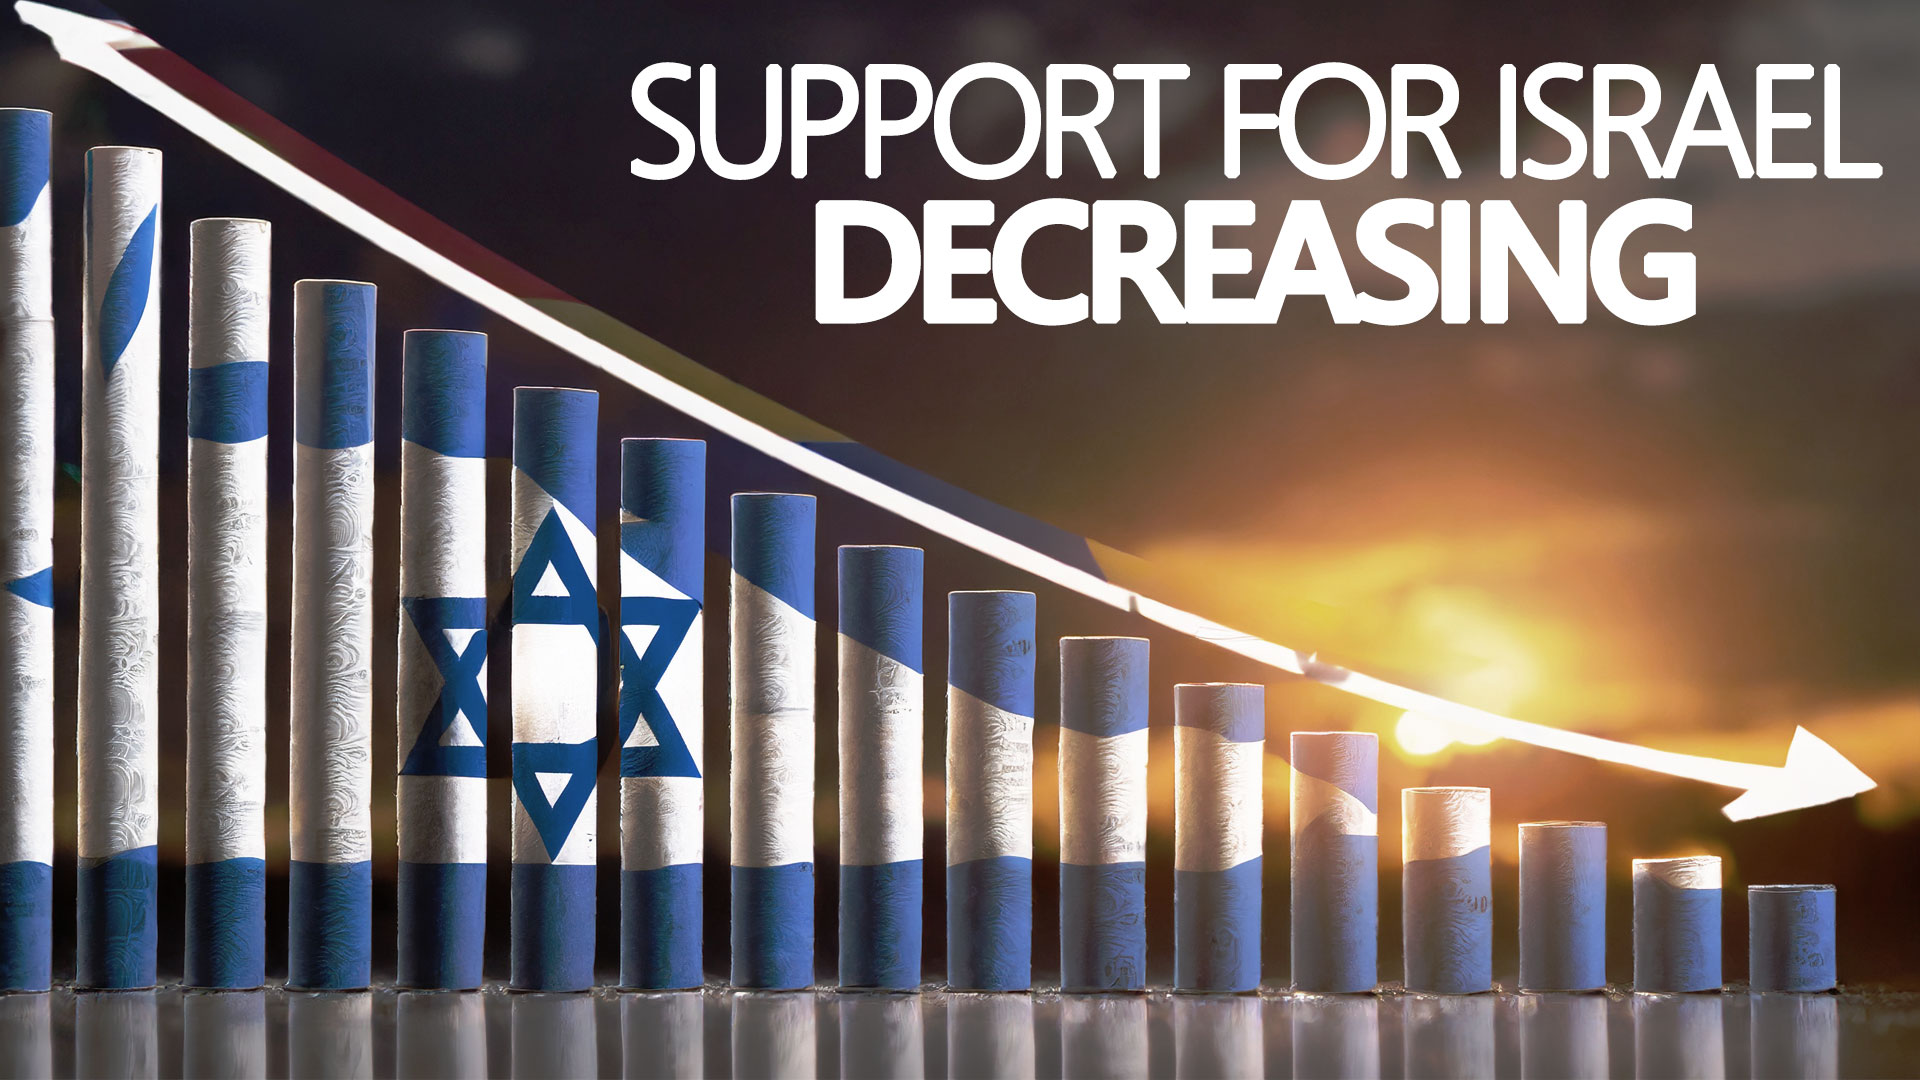 Bar graph showing a 500% decrease in Israeli support